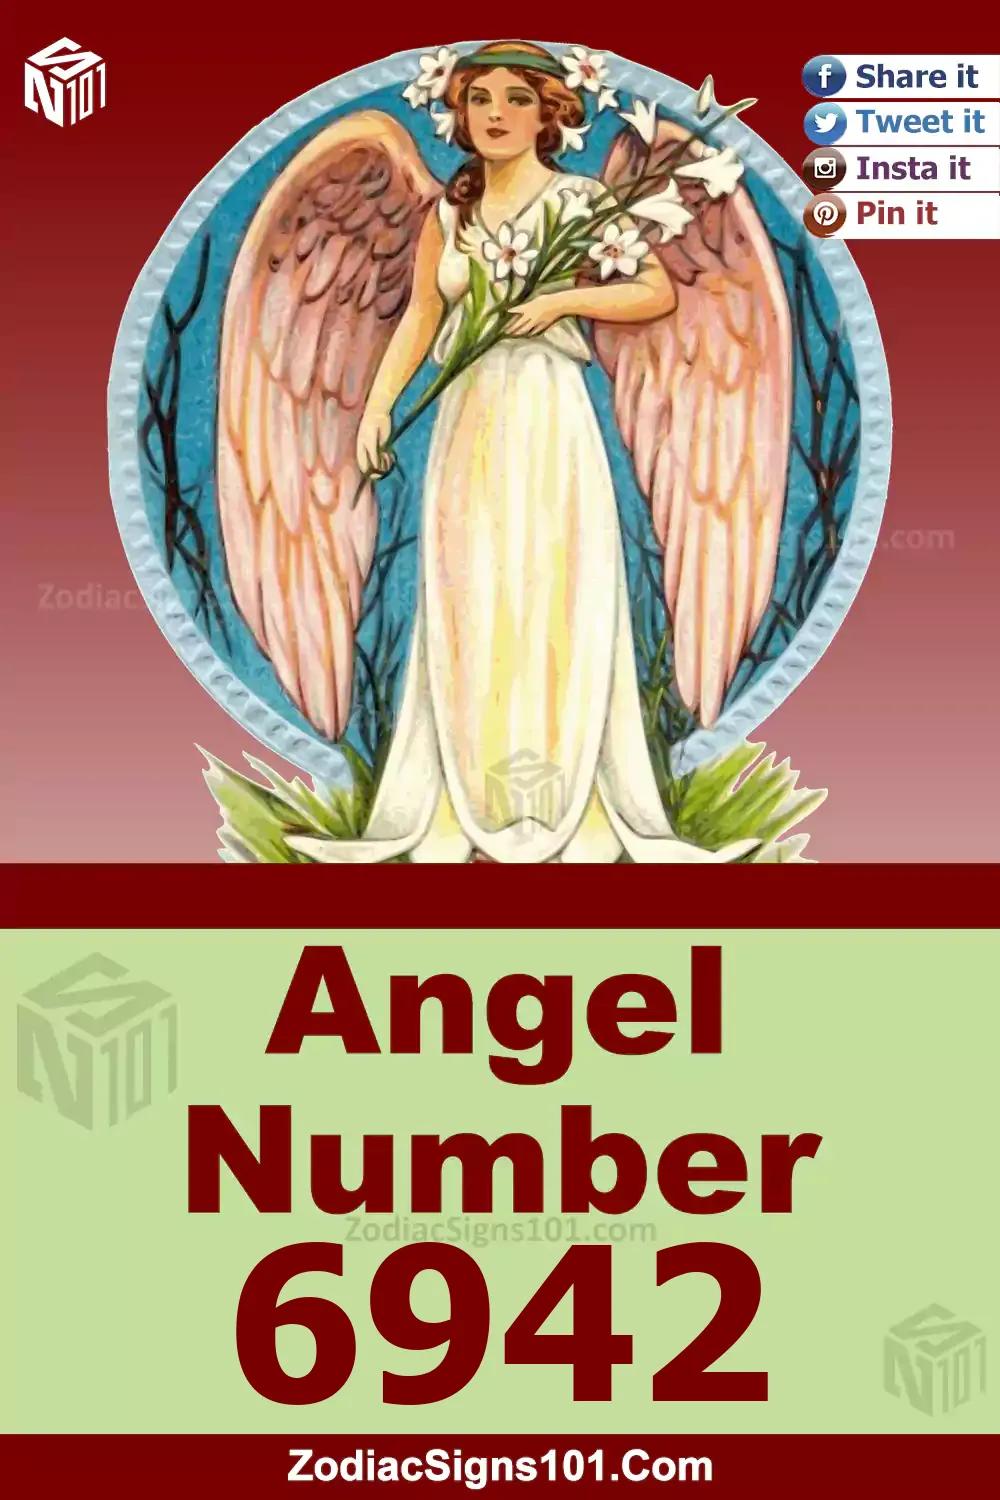 6942 Angel Number Meaning